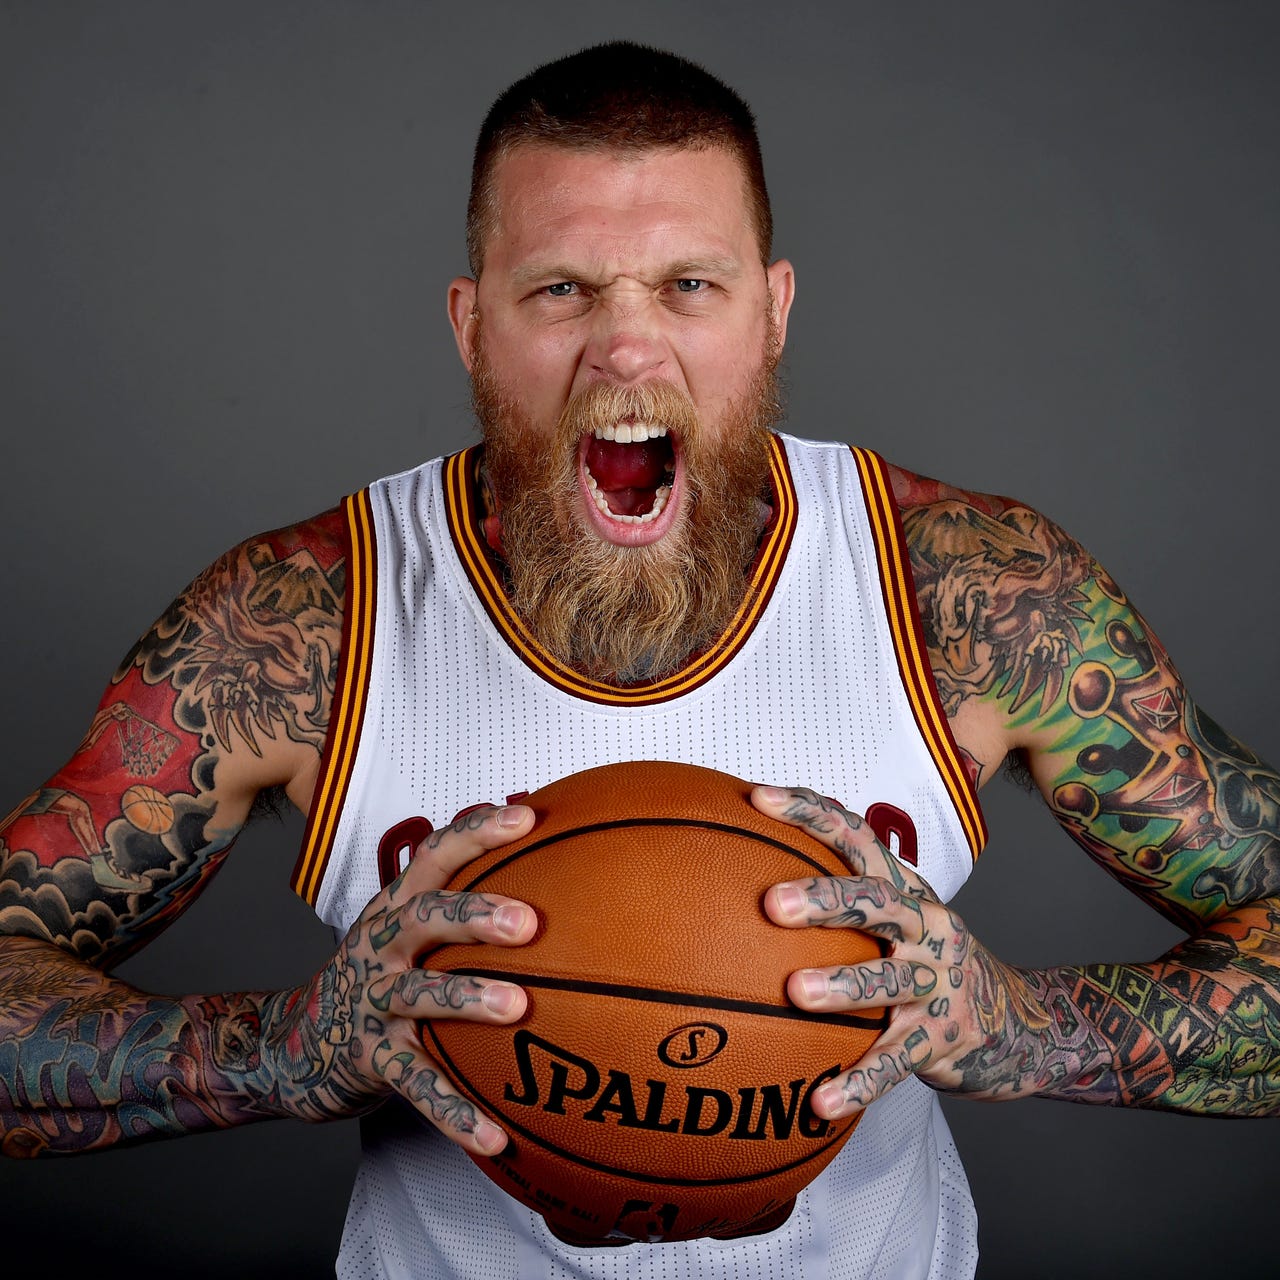 Chris Andersen traded from Cleveland Cavaliers for Hornets' 2nd-round pick  – The Denver Post